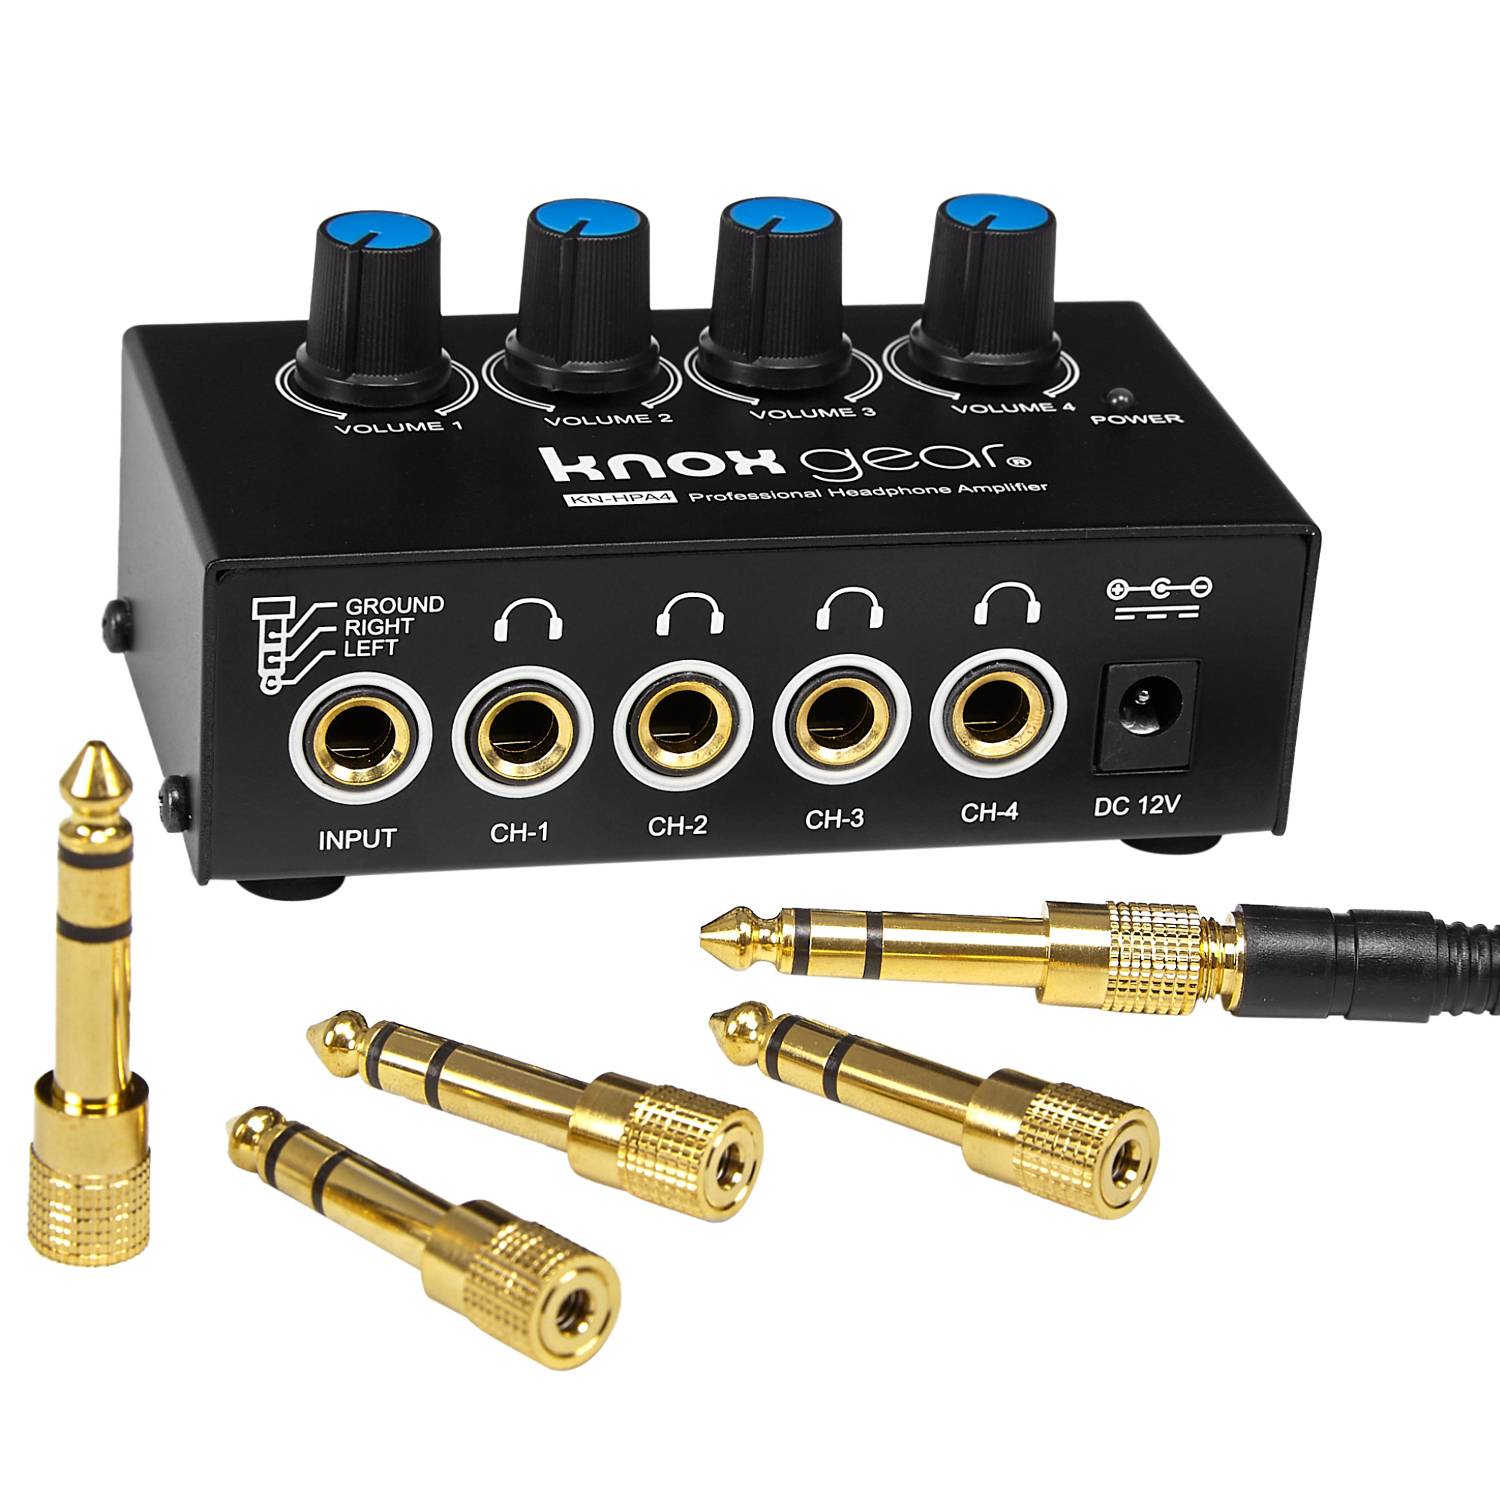 Knox Gear Compact 4-Channel Stereo Headphone Amplifier with DC 12V Power Adapter